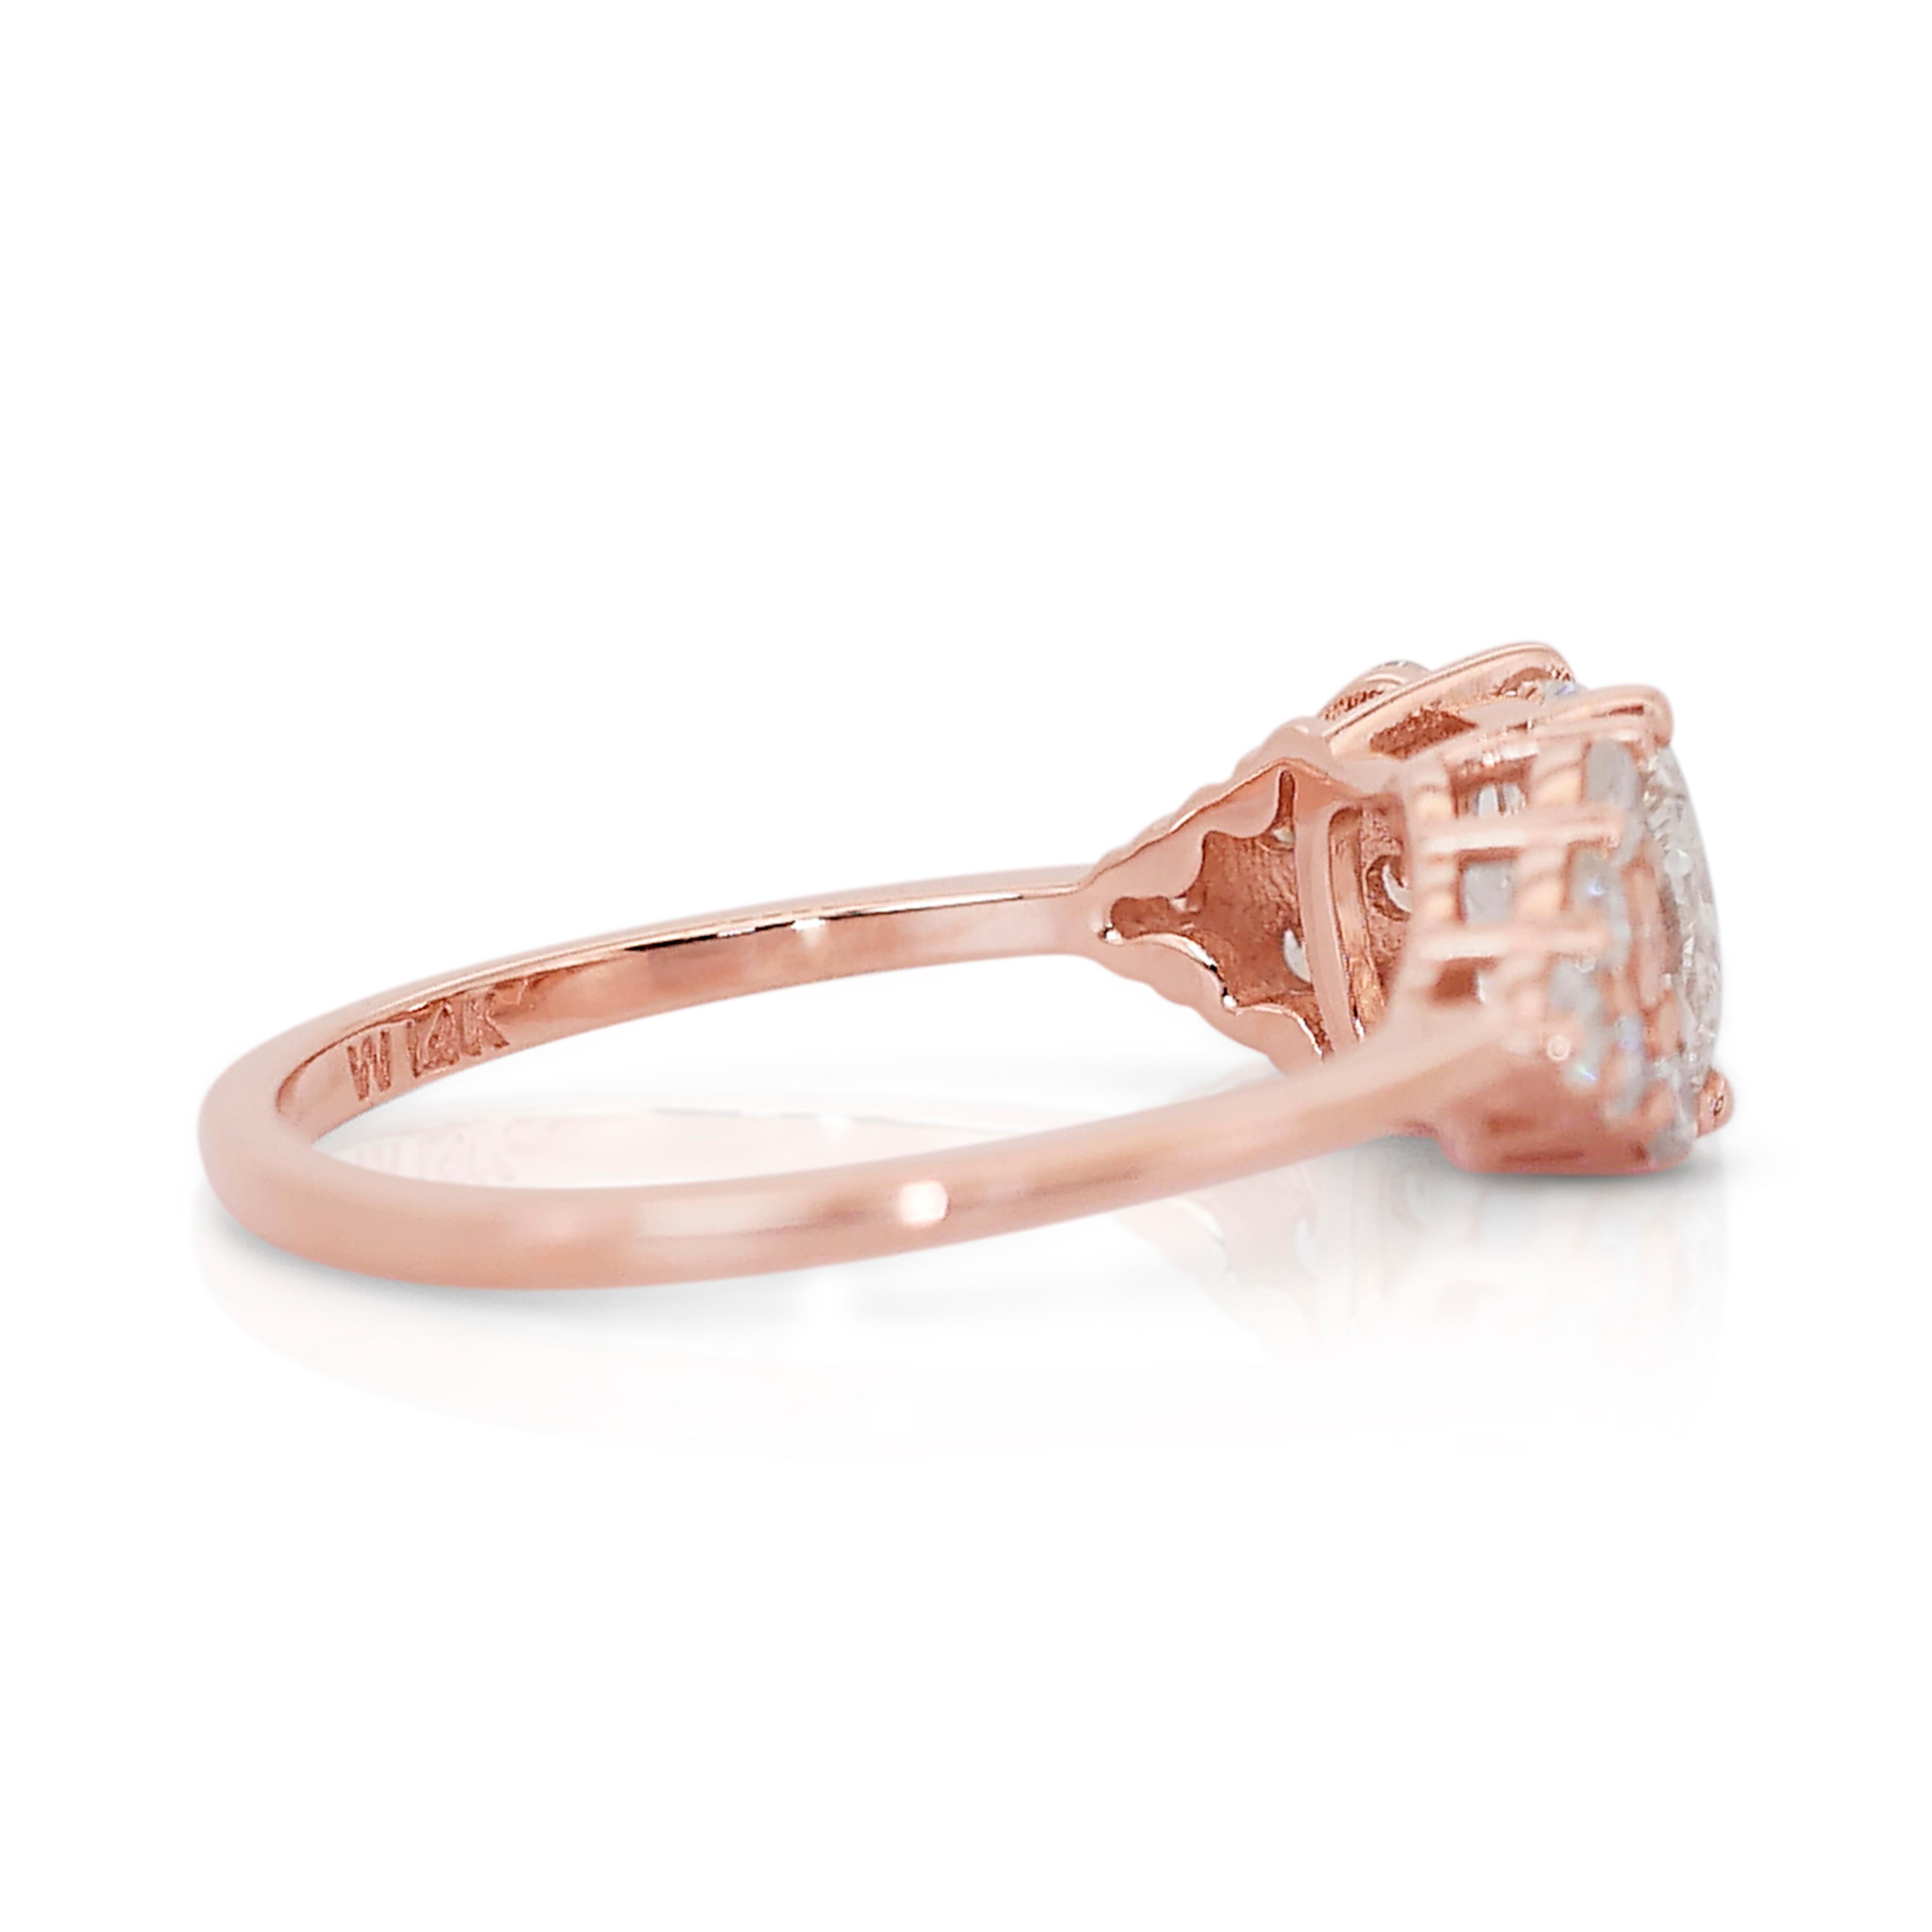 Lovely 1.65ct Diamonds Pave Ring in 14k Rose Gold - IGI Certified In New Condition For Sale In רמת גן, IL